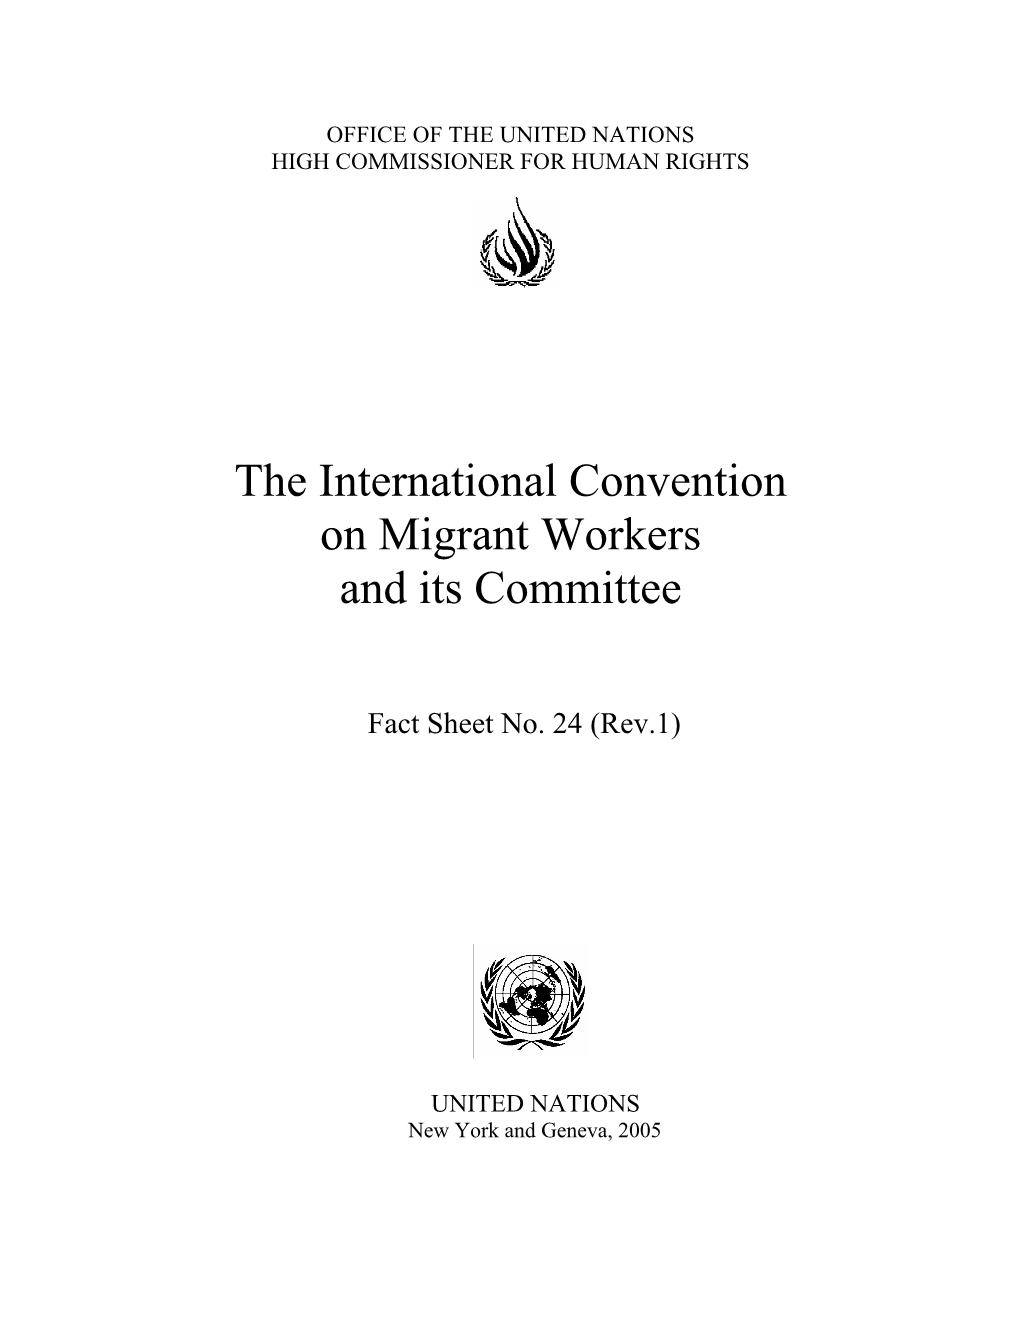 The International Convention on Migrant Workers and Its Committee